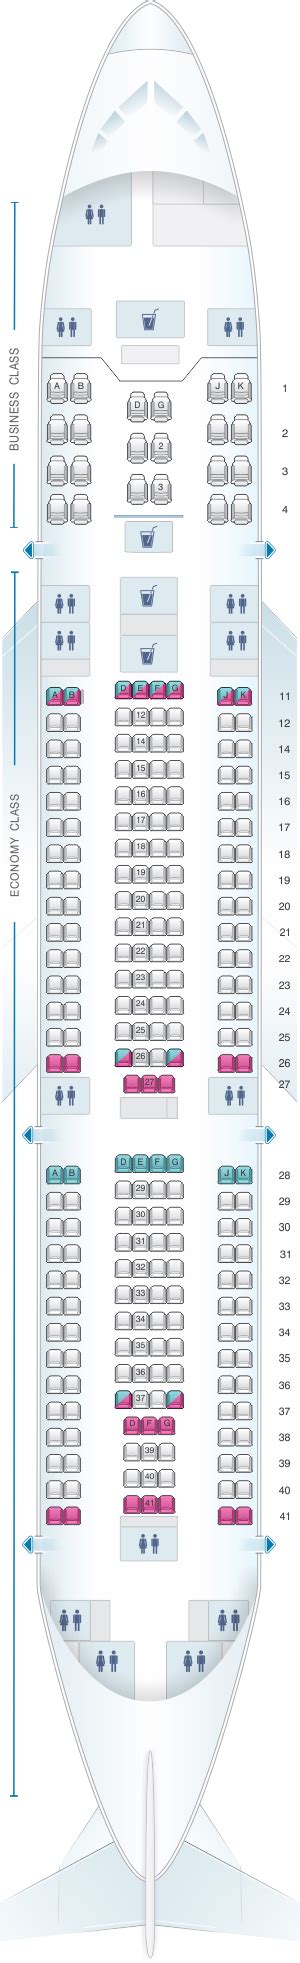 Airbus A330 Seat Map Turkish Airlines